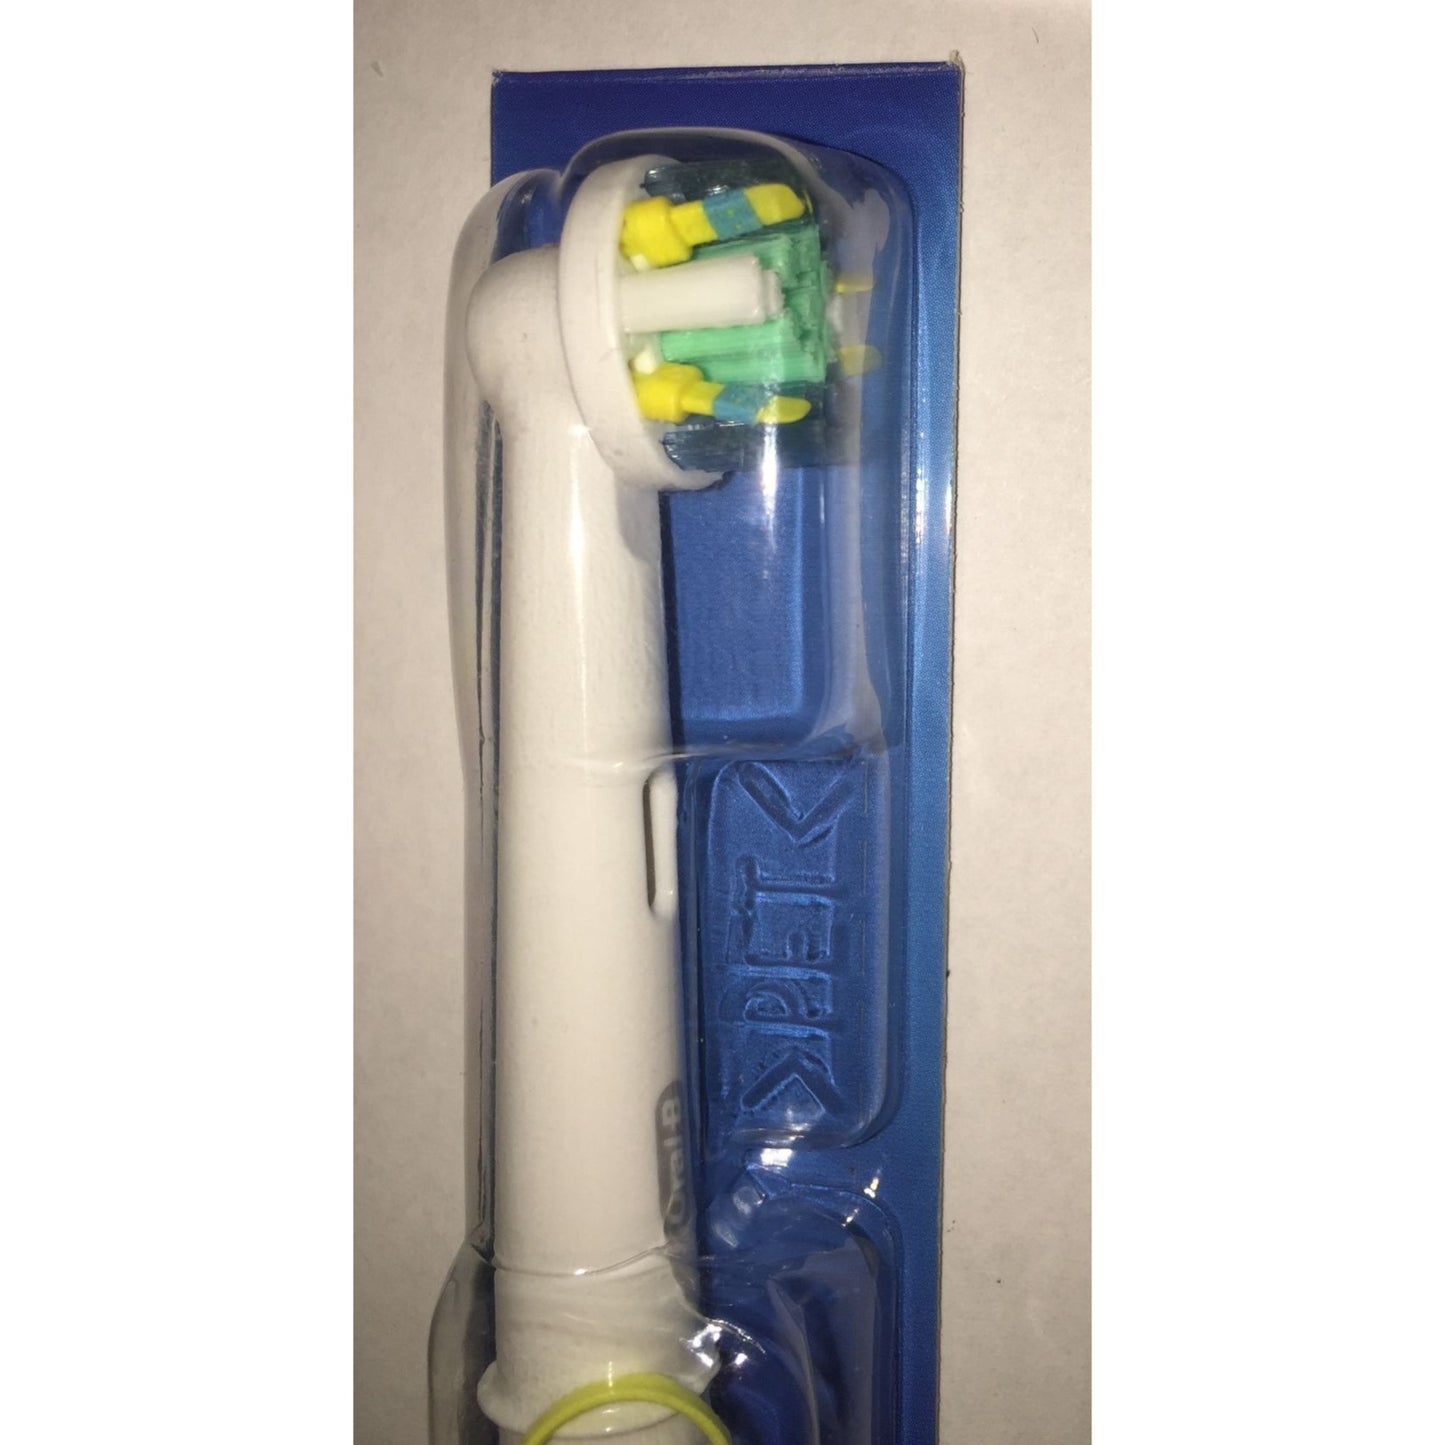 Oral B Floss head for Triumph Toothbrush- New in Packaging